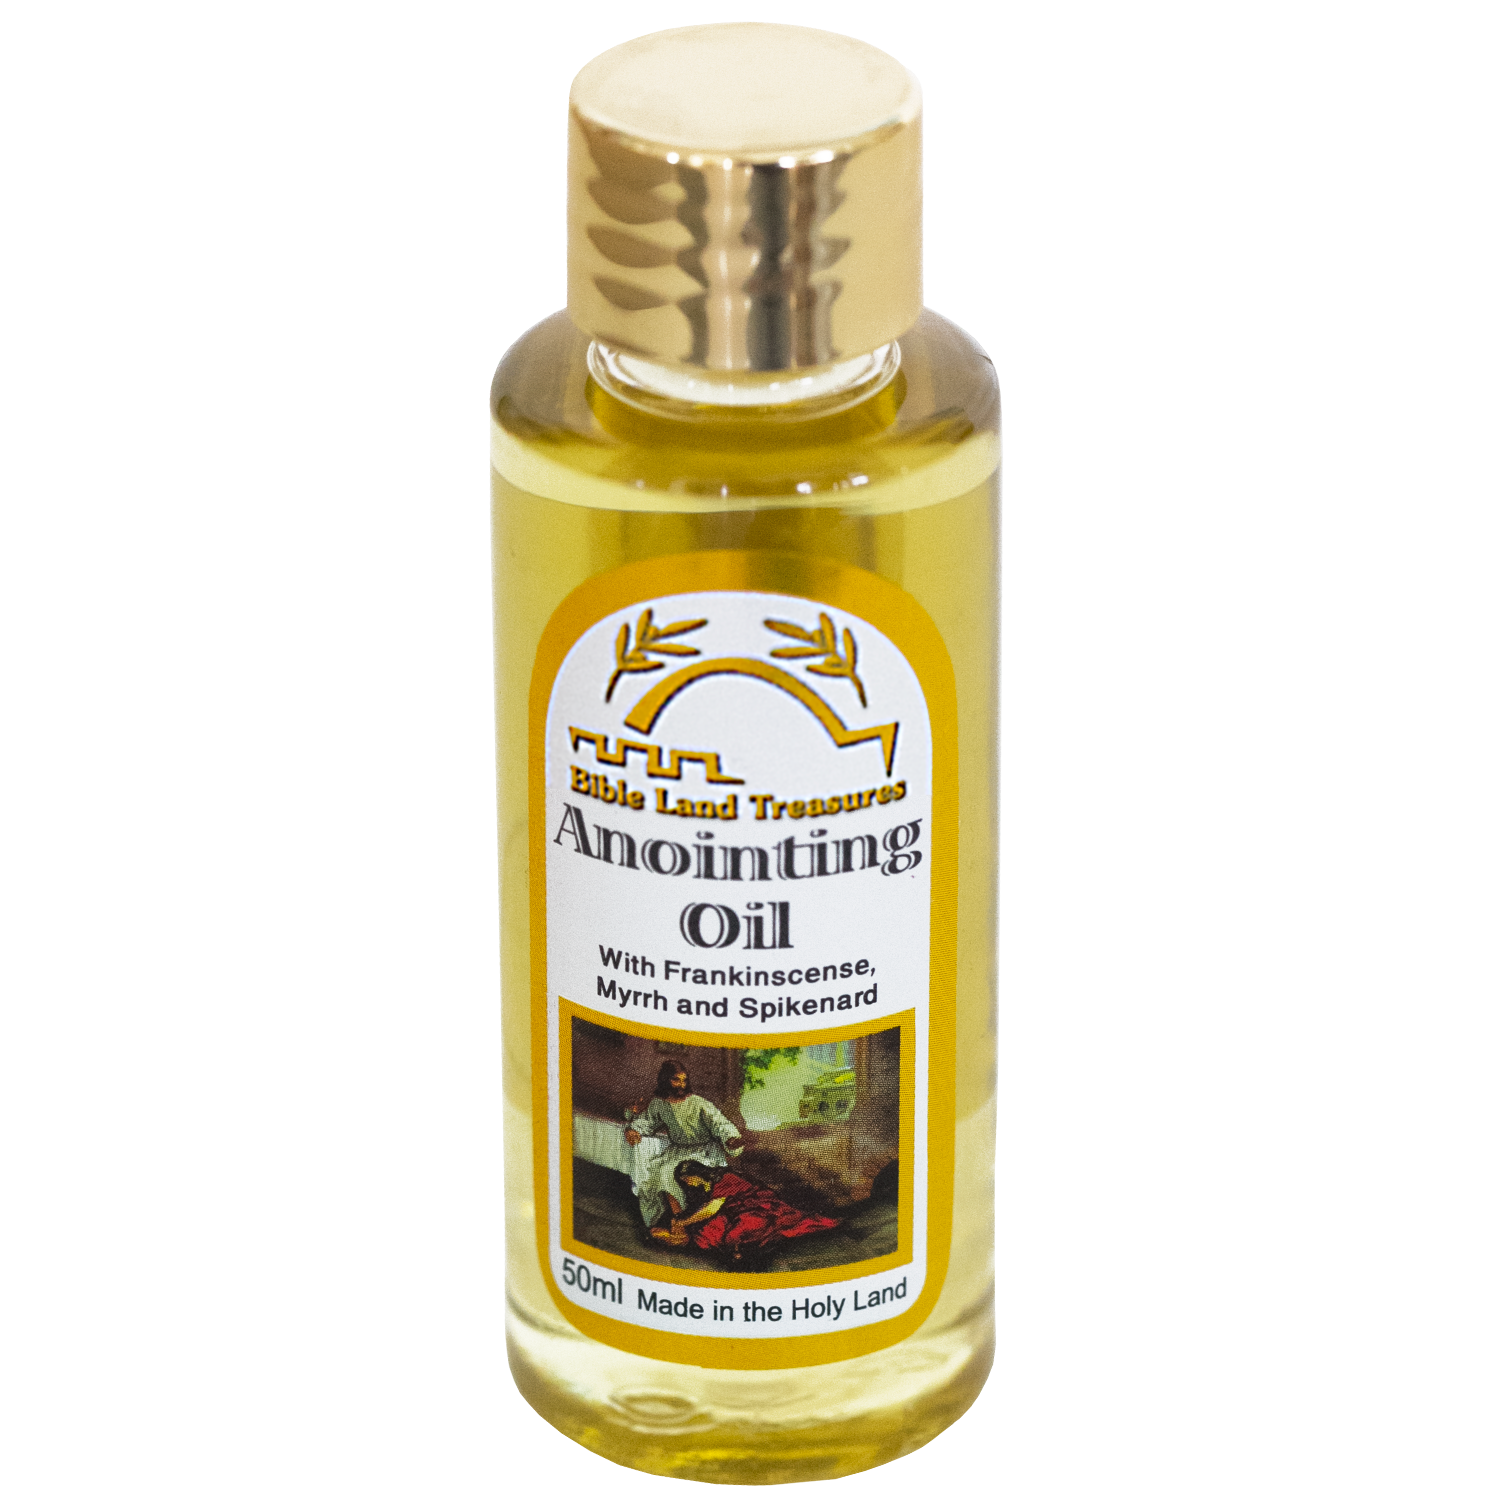 Carry Size Bible Land Treasure Anointing Oil